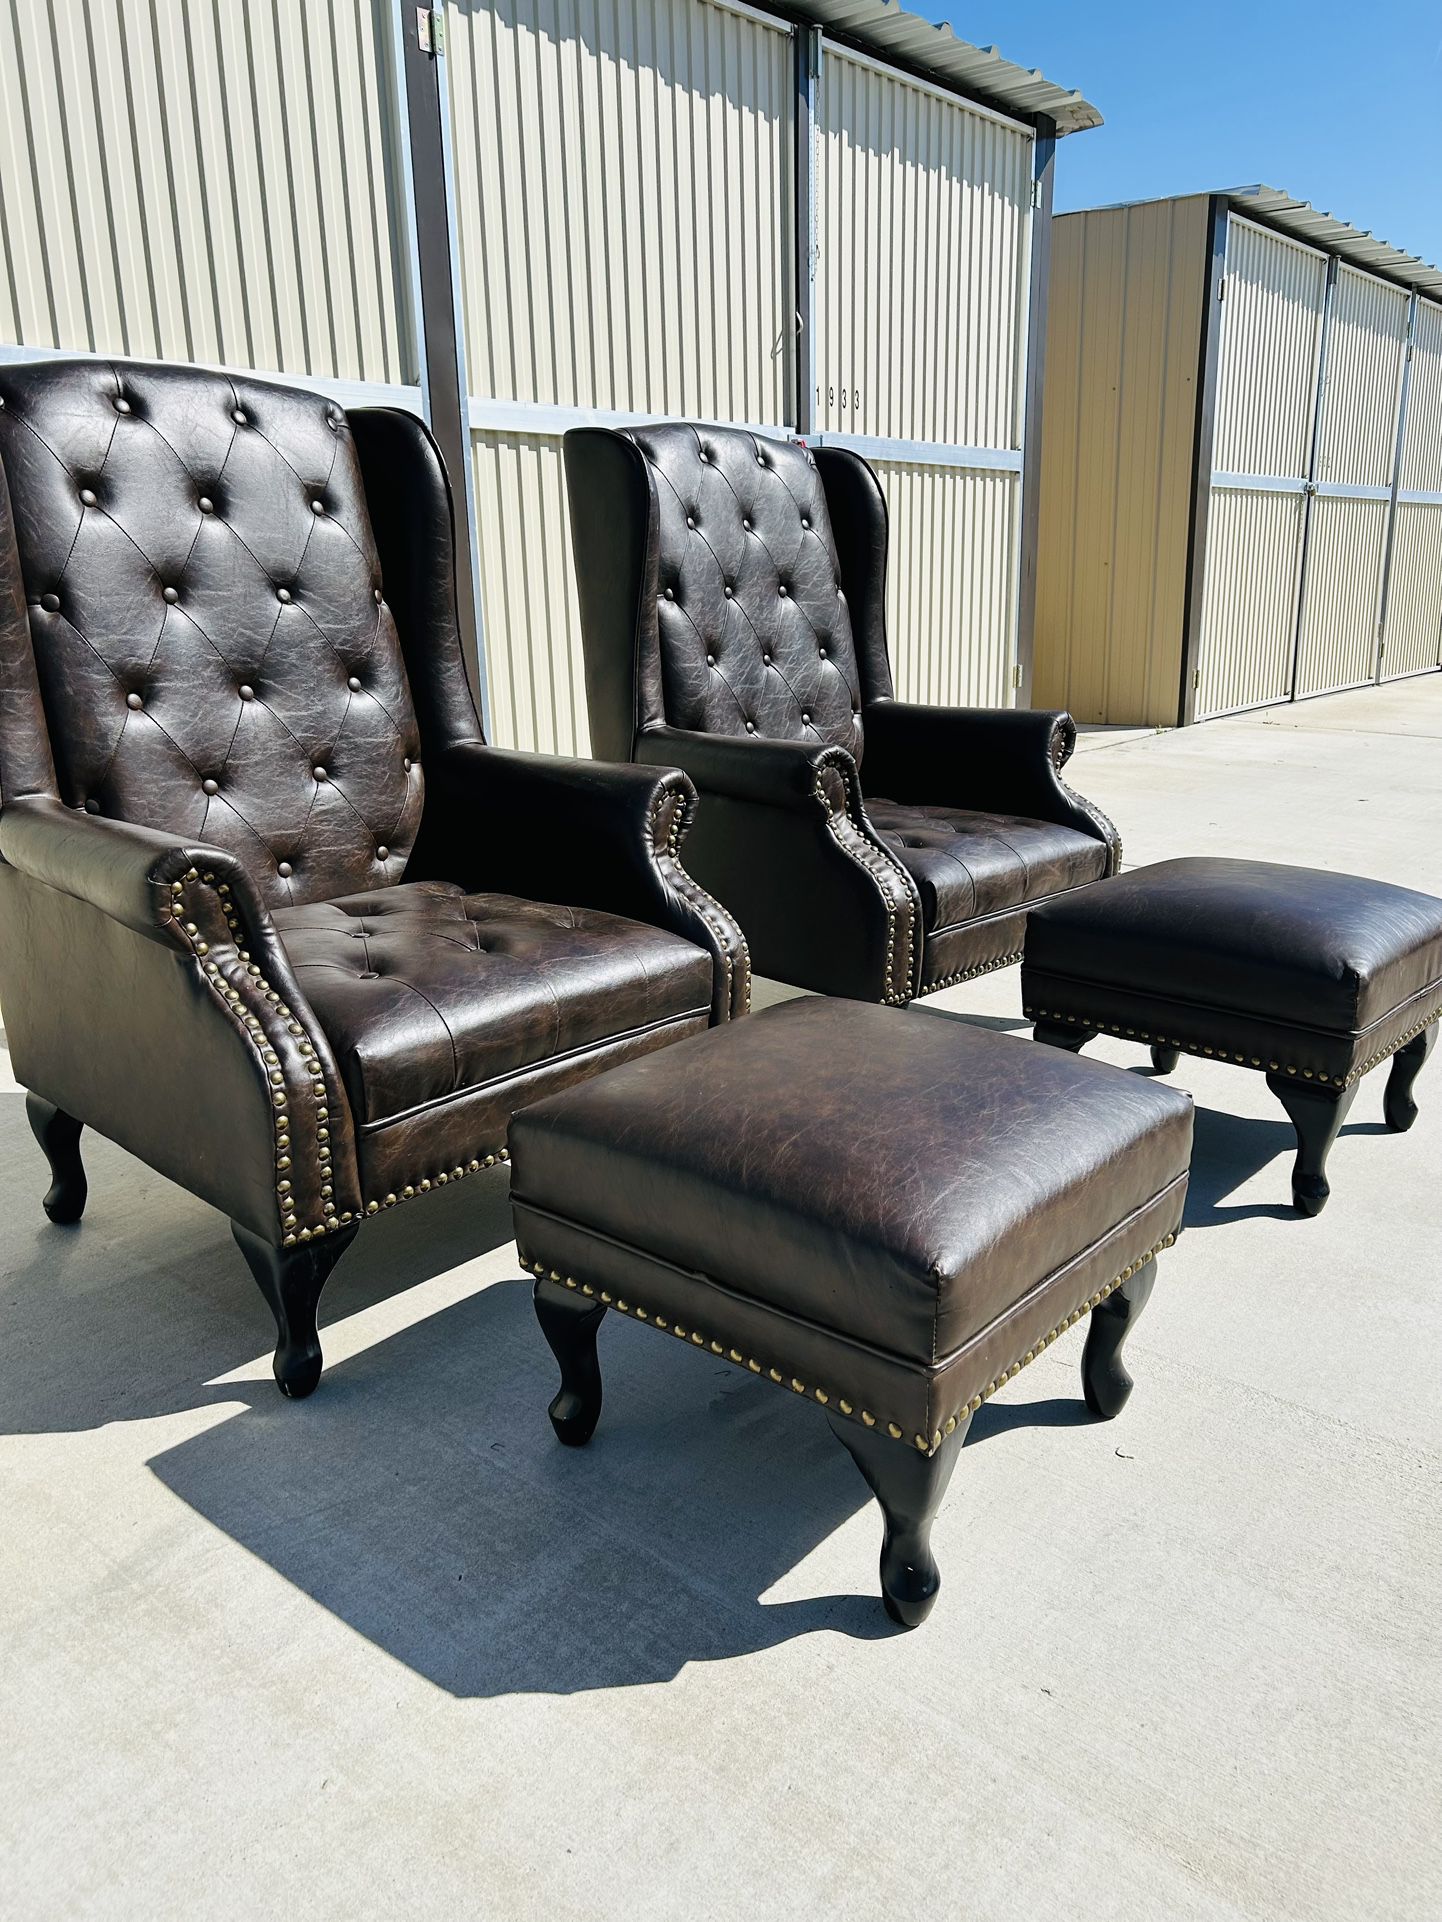 2 Dark Brown Marble Faux Leather High Back Chairs With 2 Foot Rest Ottomans 